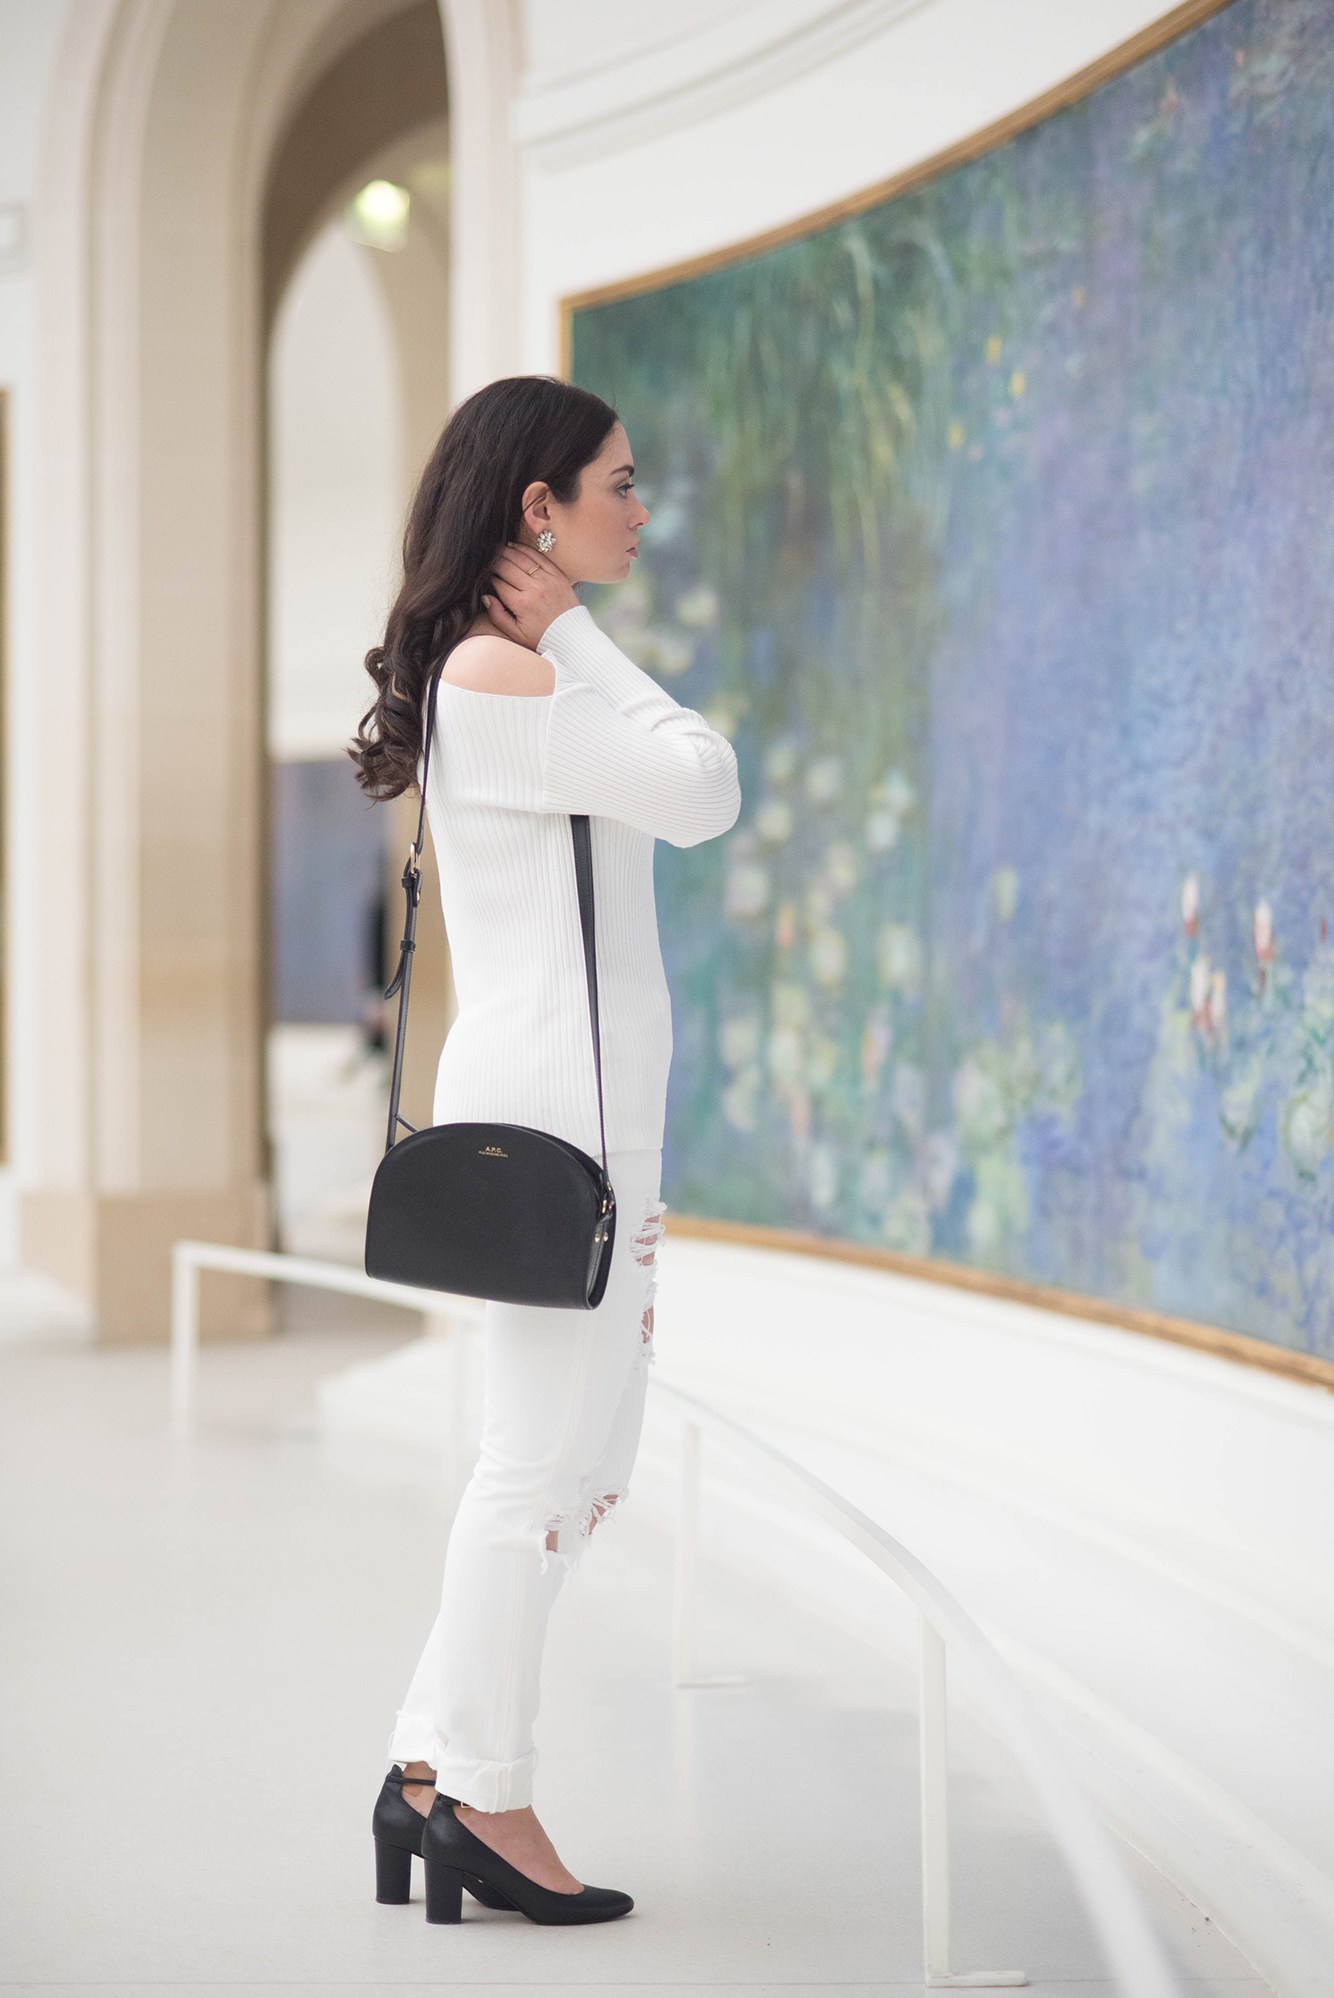 Fashion blogger Cee Fardoe of Coco & Vera wears a Majorelle Twister sweater and carries an APC half moon bag at the Musee de l'Orangerie in Paris